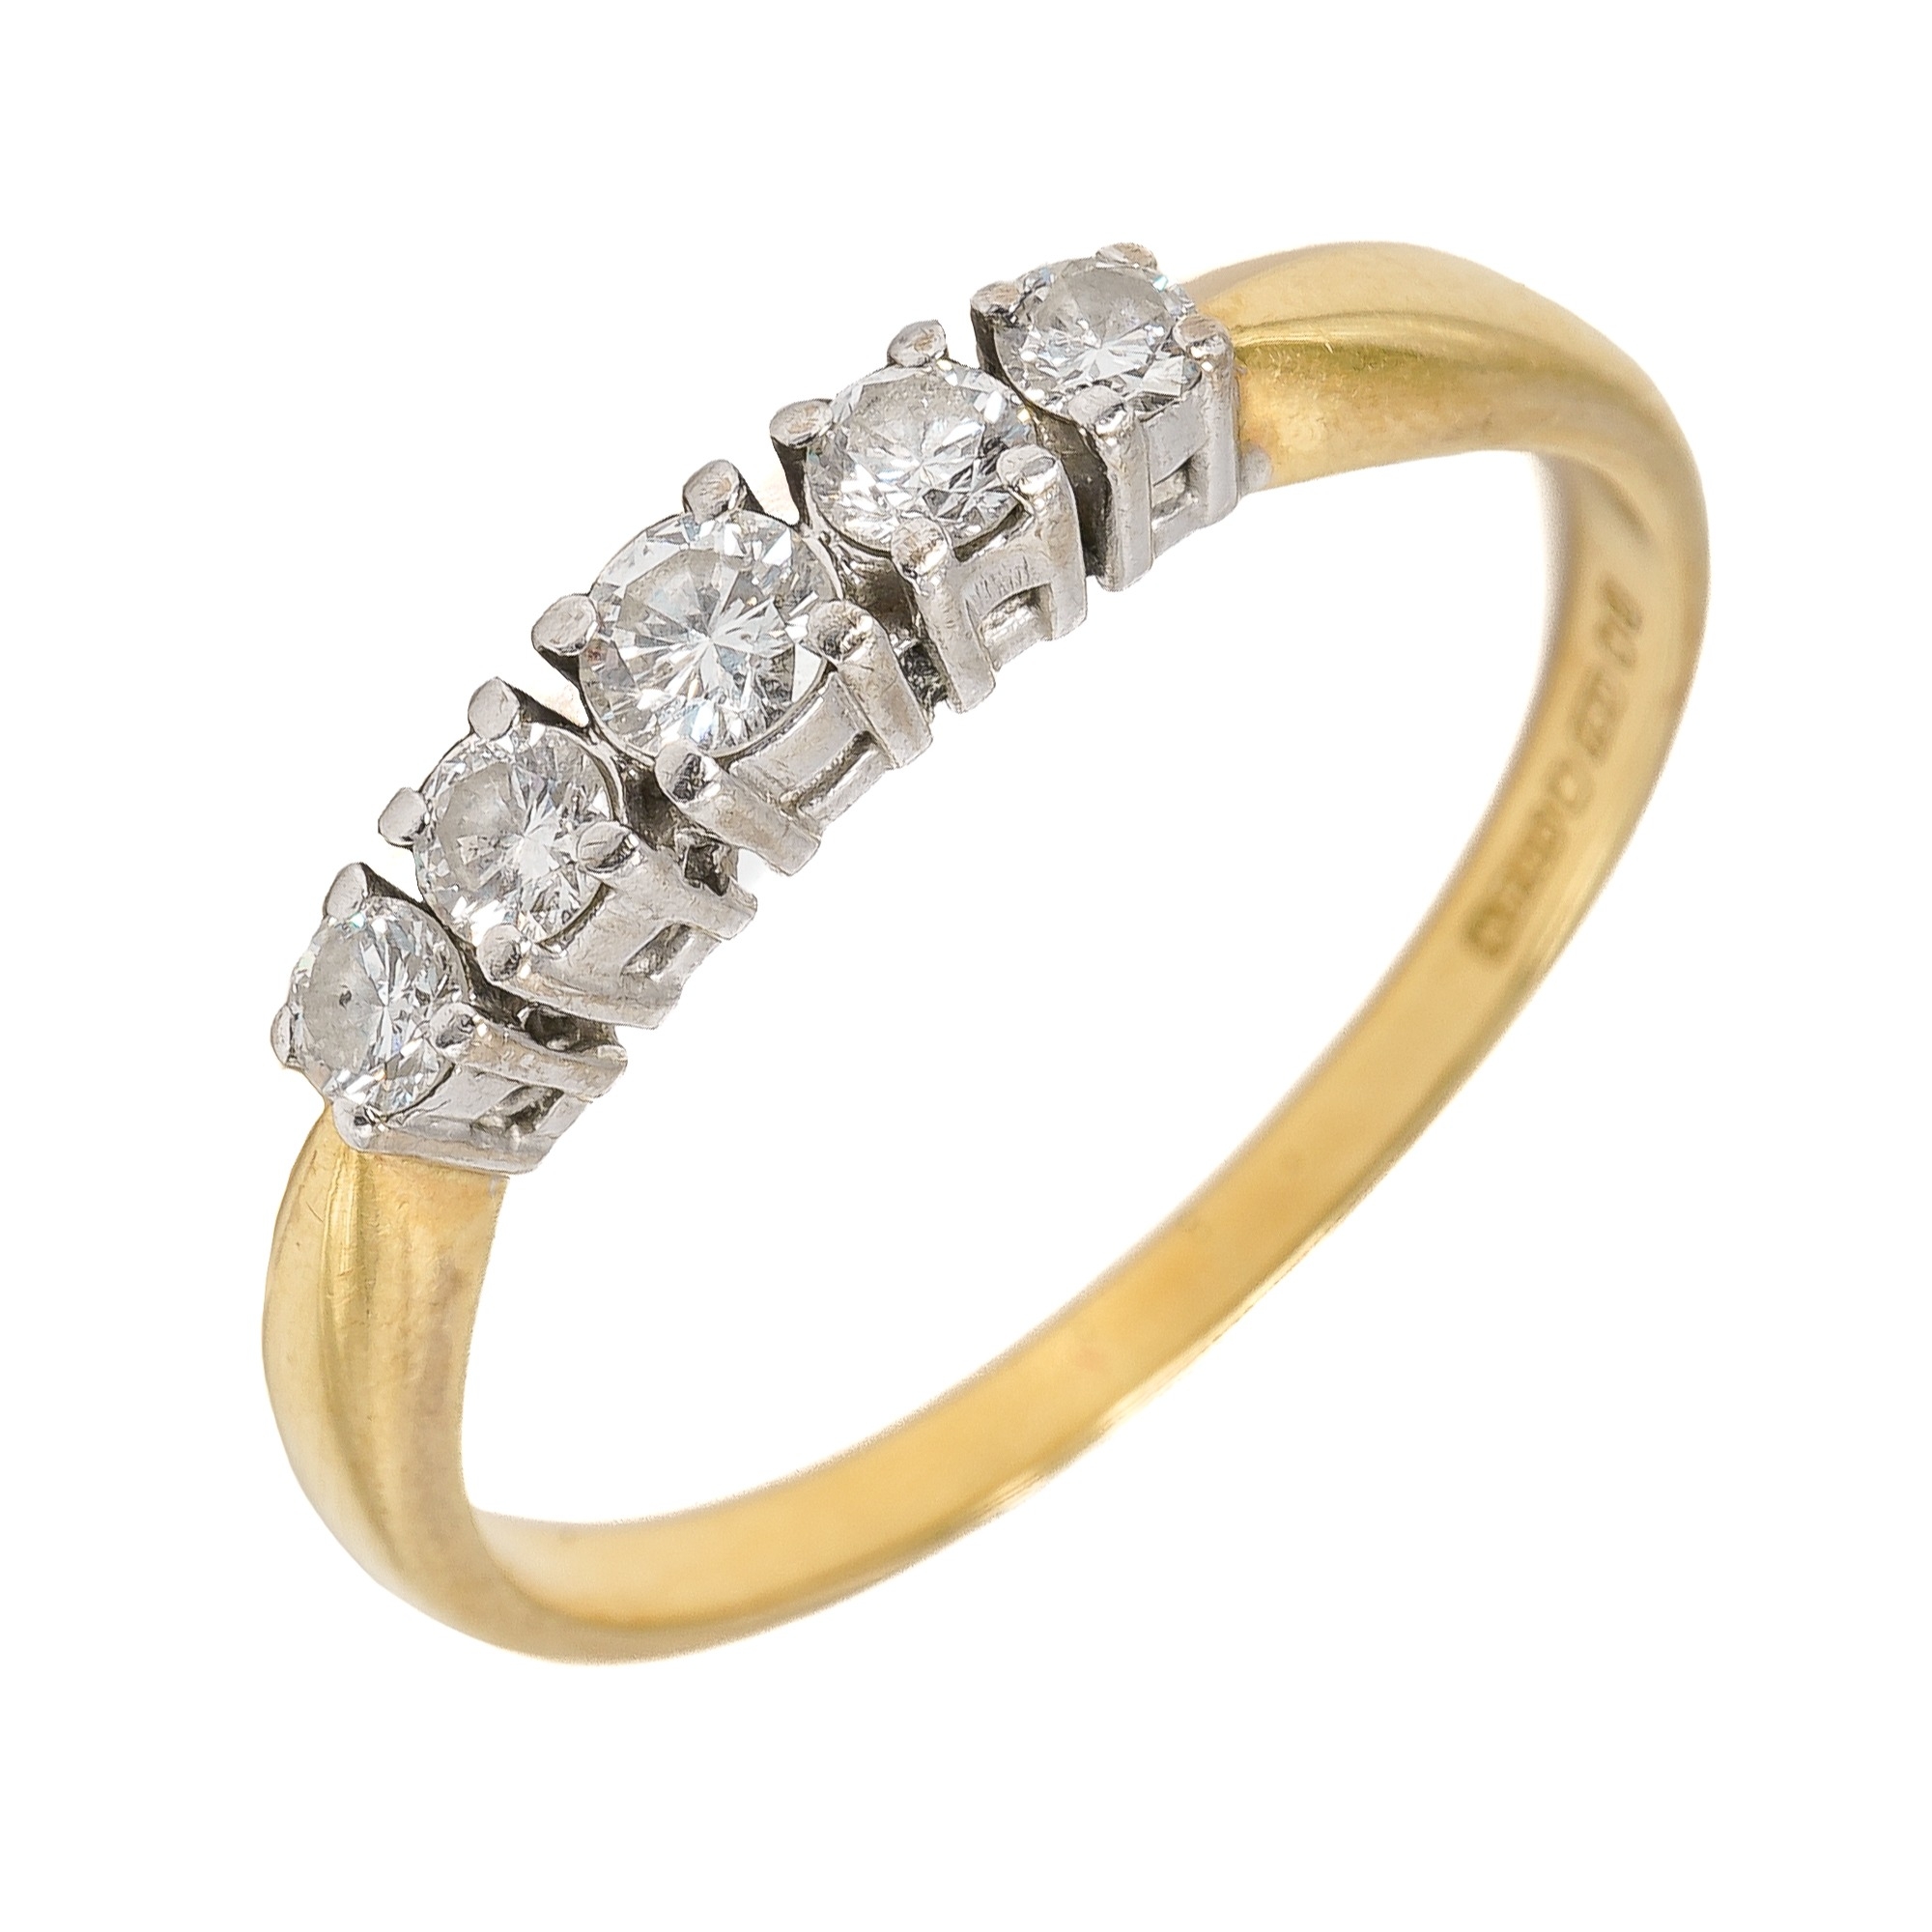 An 18ct yellow gold and diamond five stone ring, set with graduated round brilliant cut diamonds,